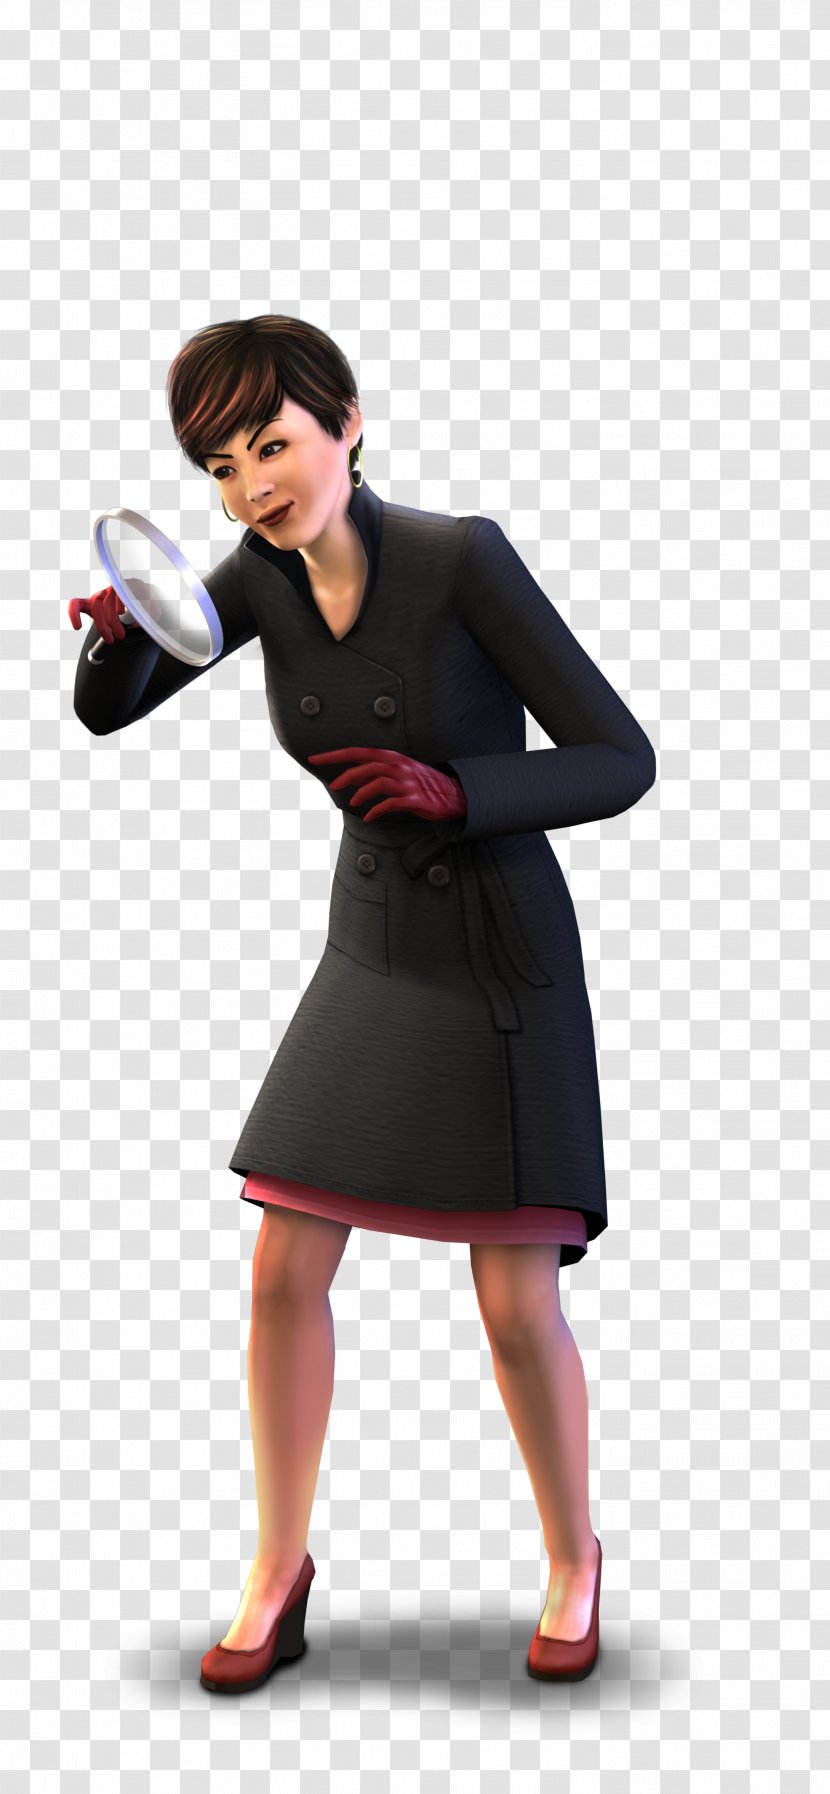 The Sims 3: Ambitions 4 Expansion Pack Video Game - Silhouette - New Investigator Transparent PNG